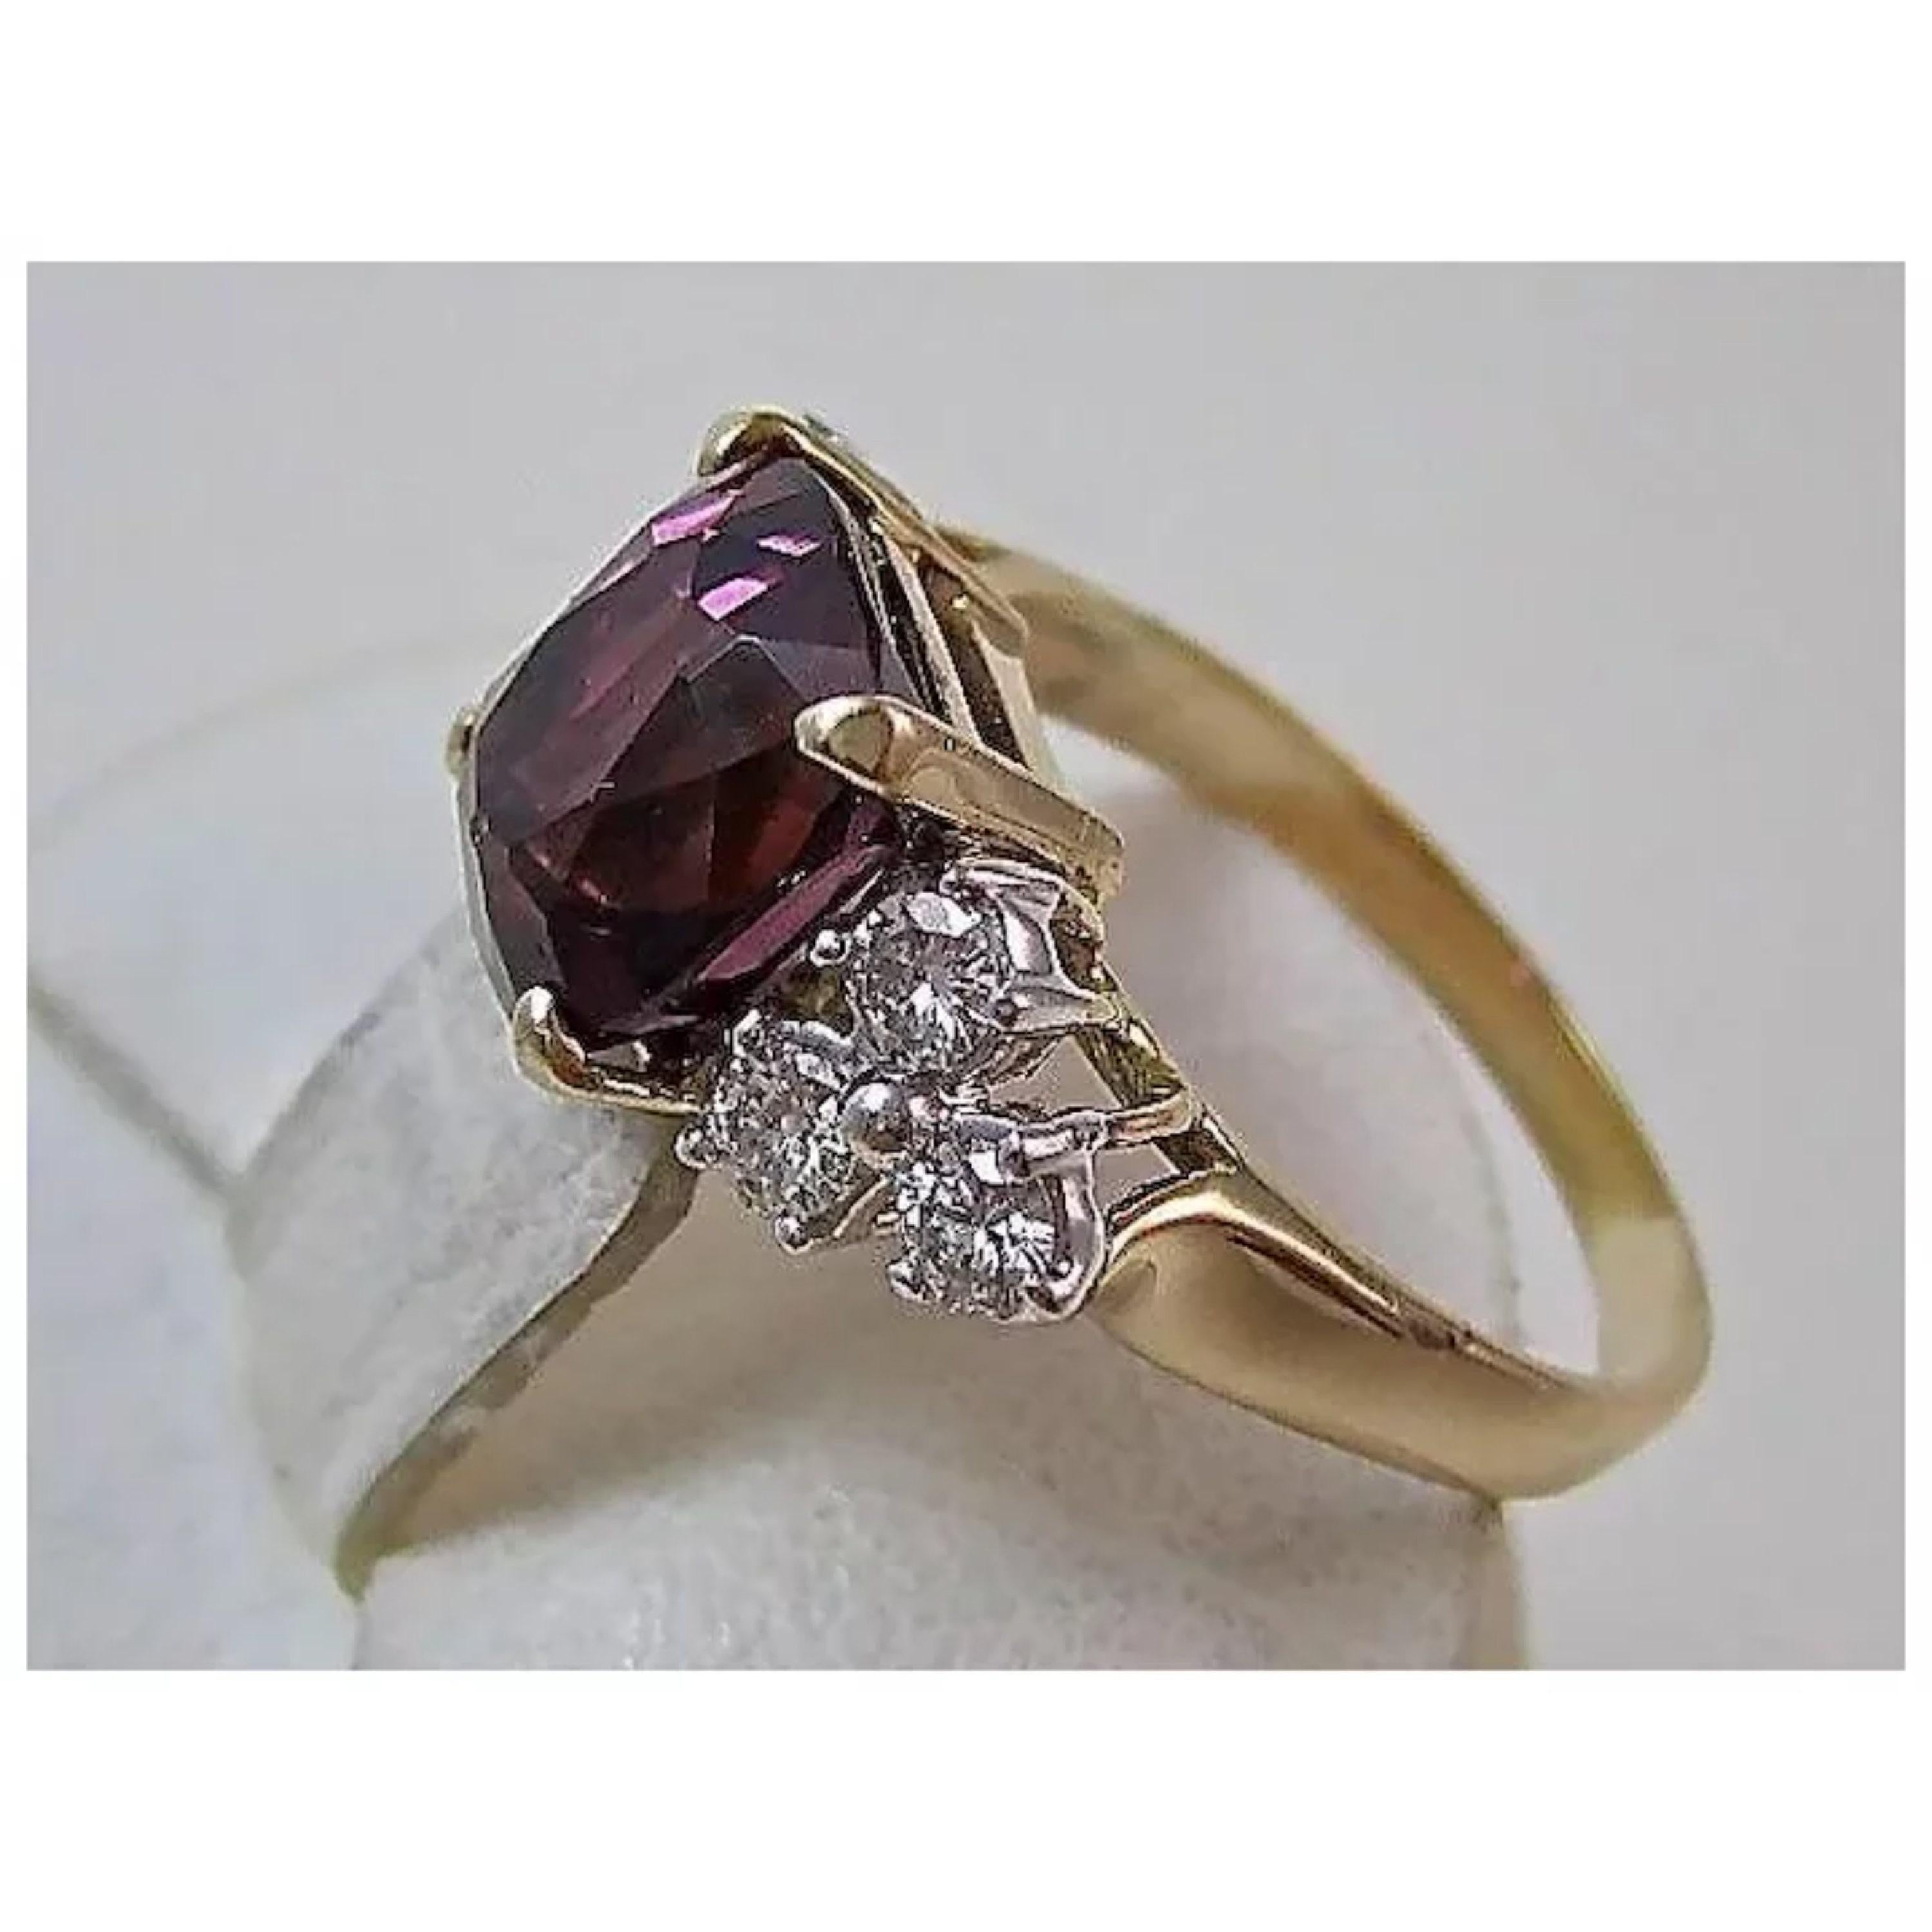 For Sale:  2 Carat Cushion Cut Ruby Diamond Engagement Ring, Ruby Diamond Cocktail Ring 3